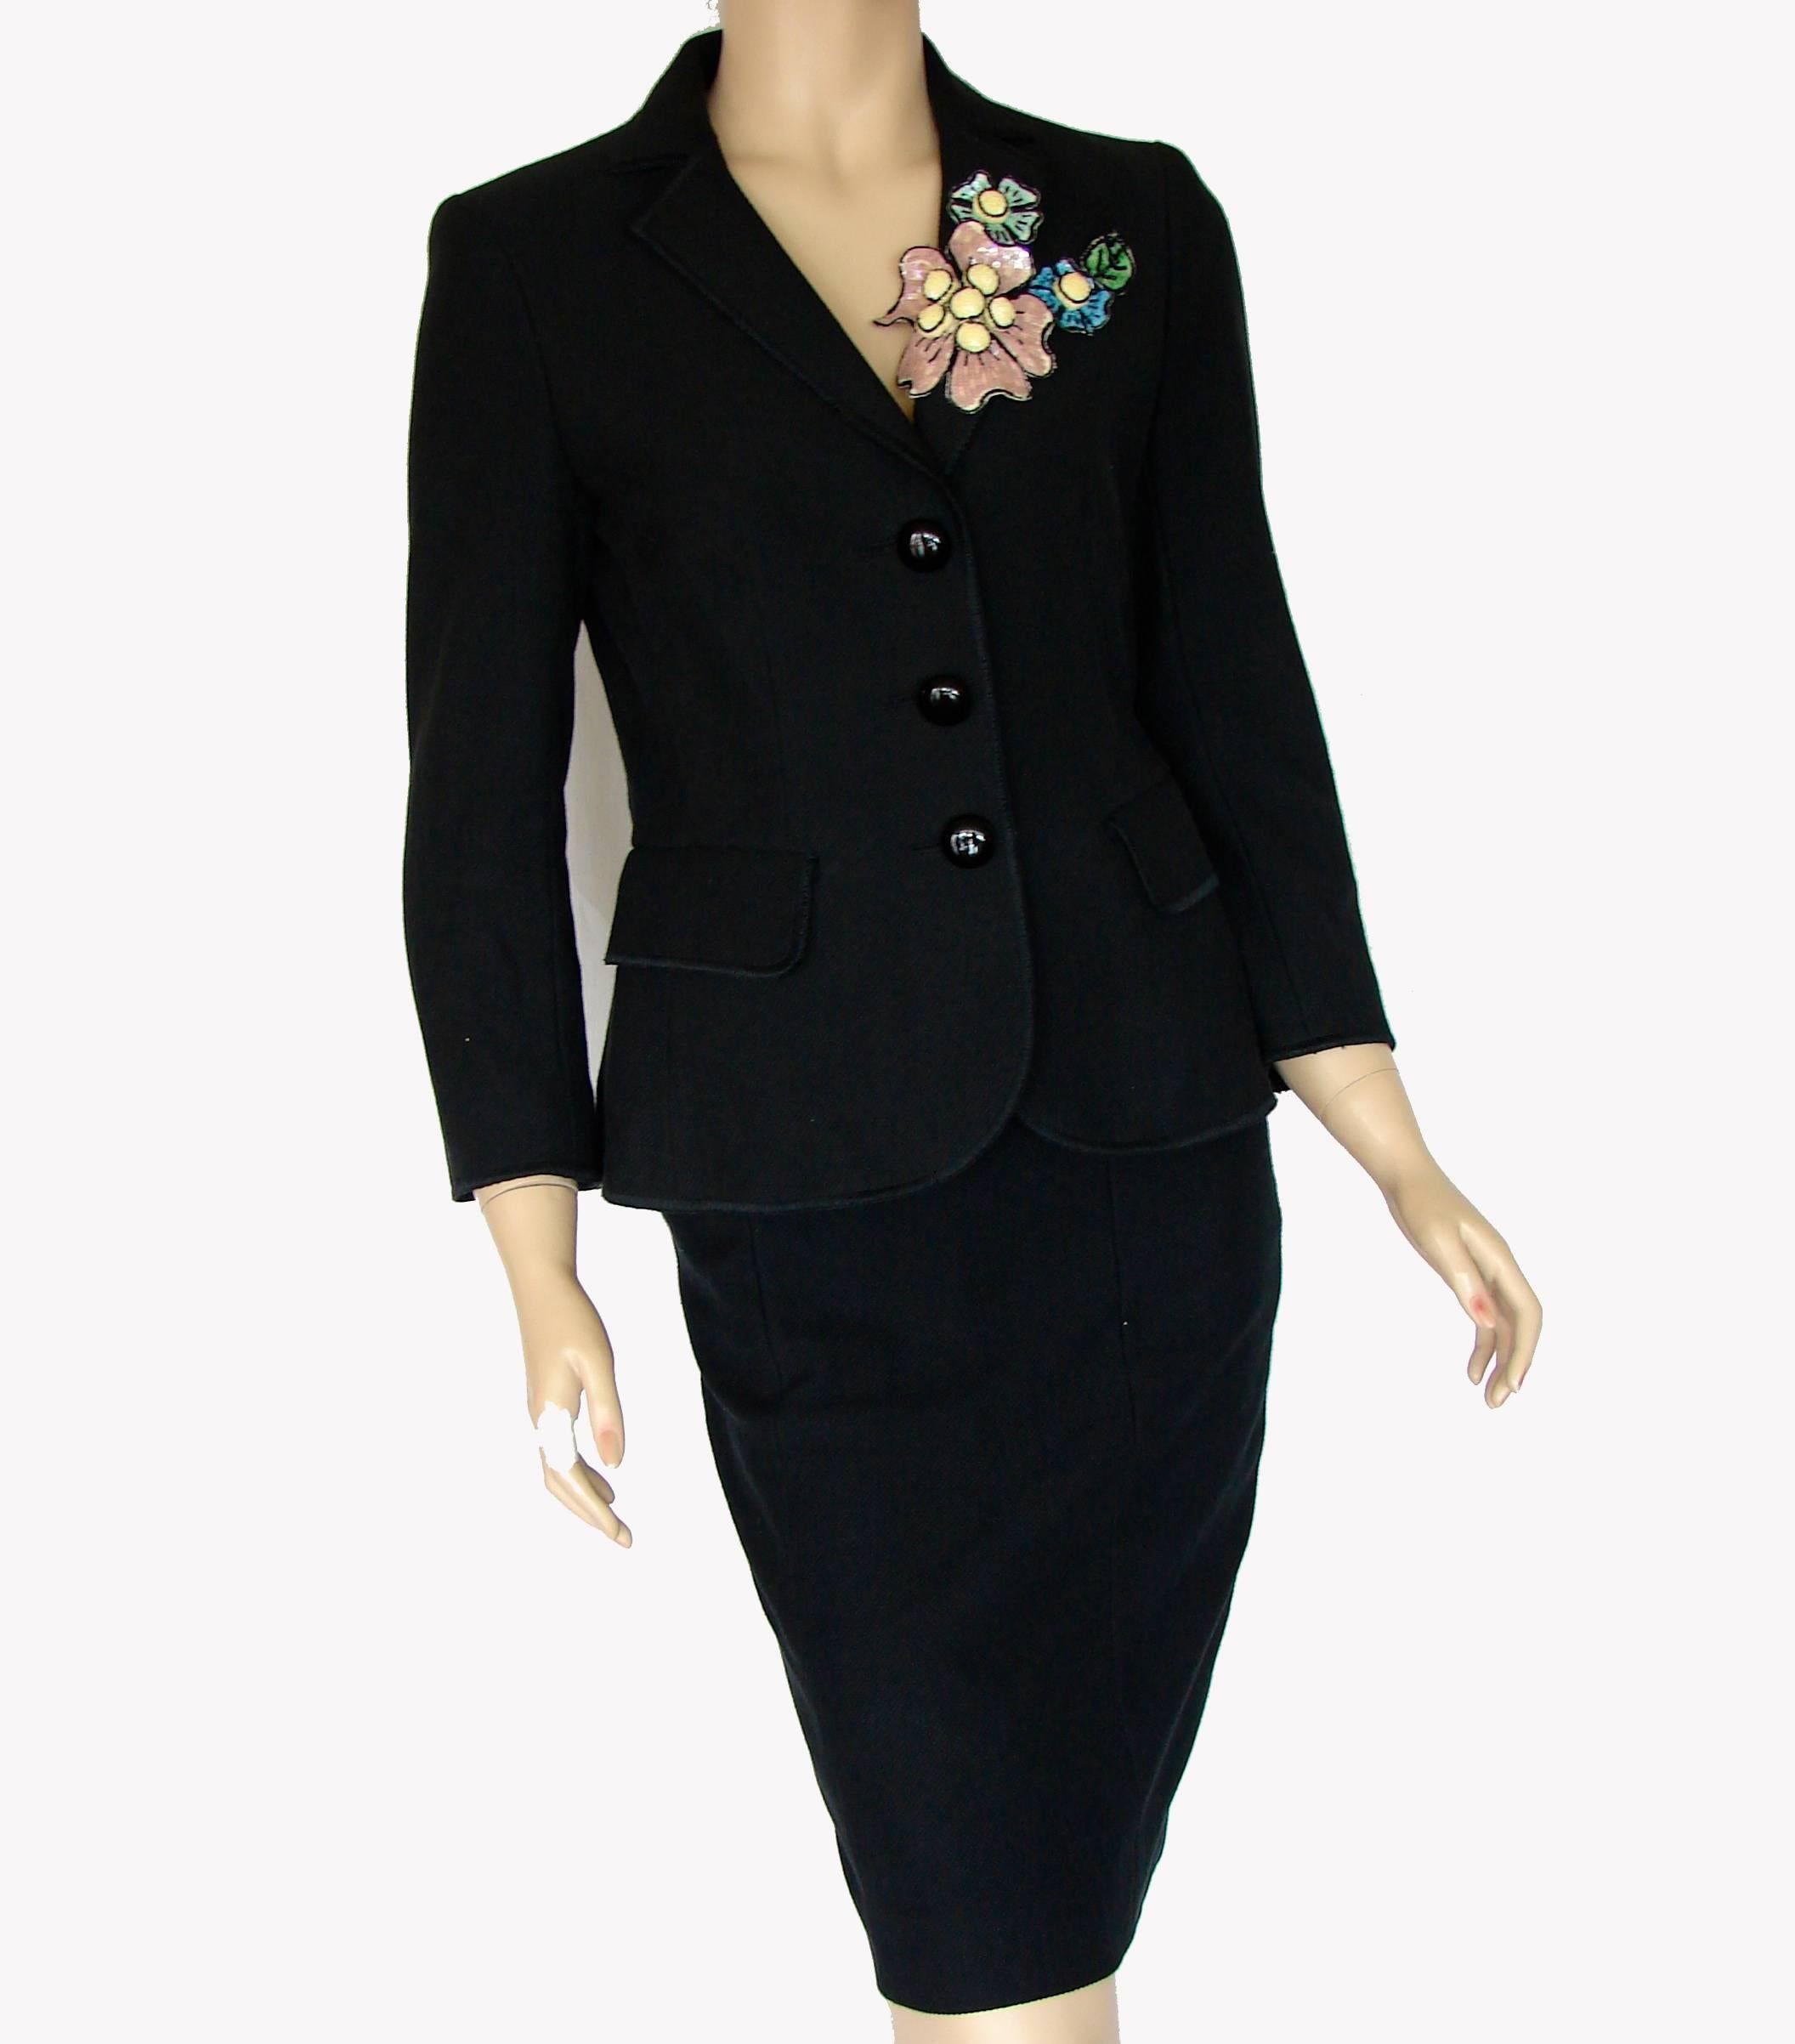 Moschino Cheap & Chic Black Jacket & Skirt Suit Sequin Corsage US Size 4/6 4